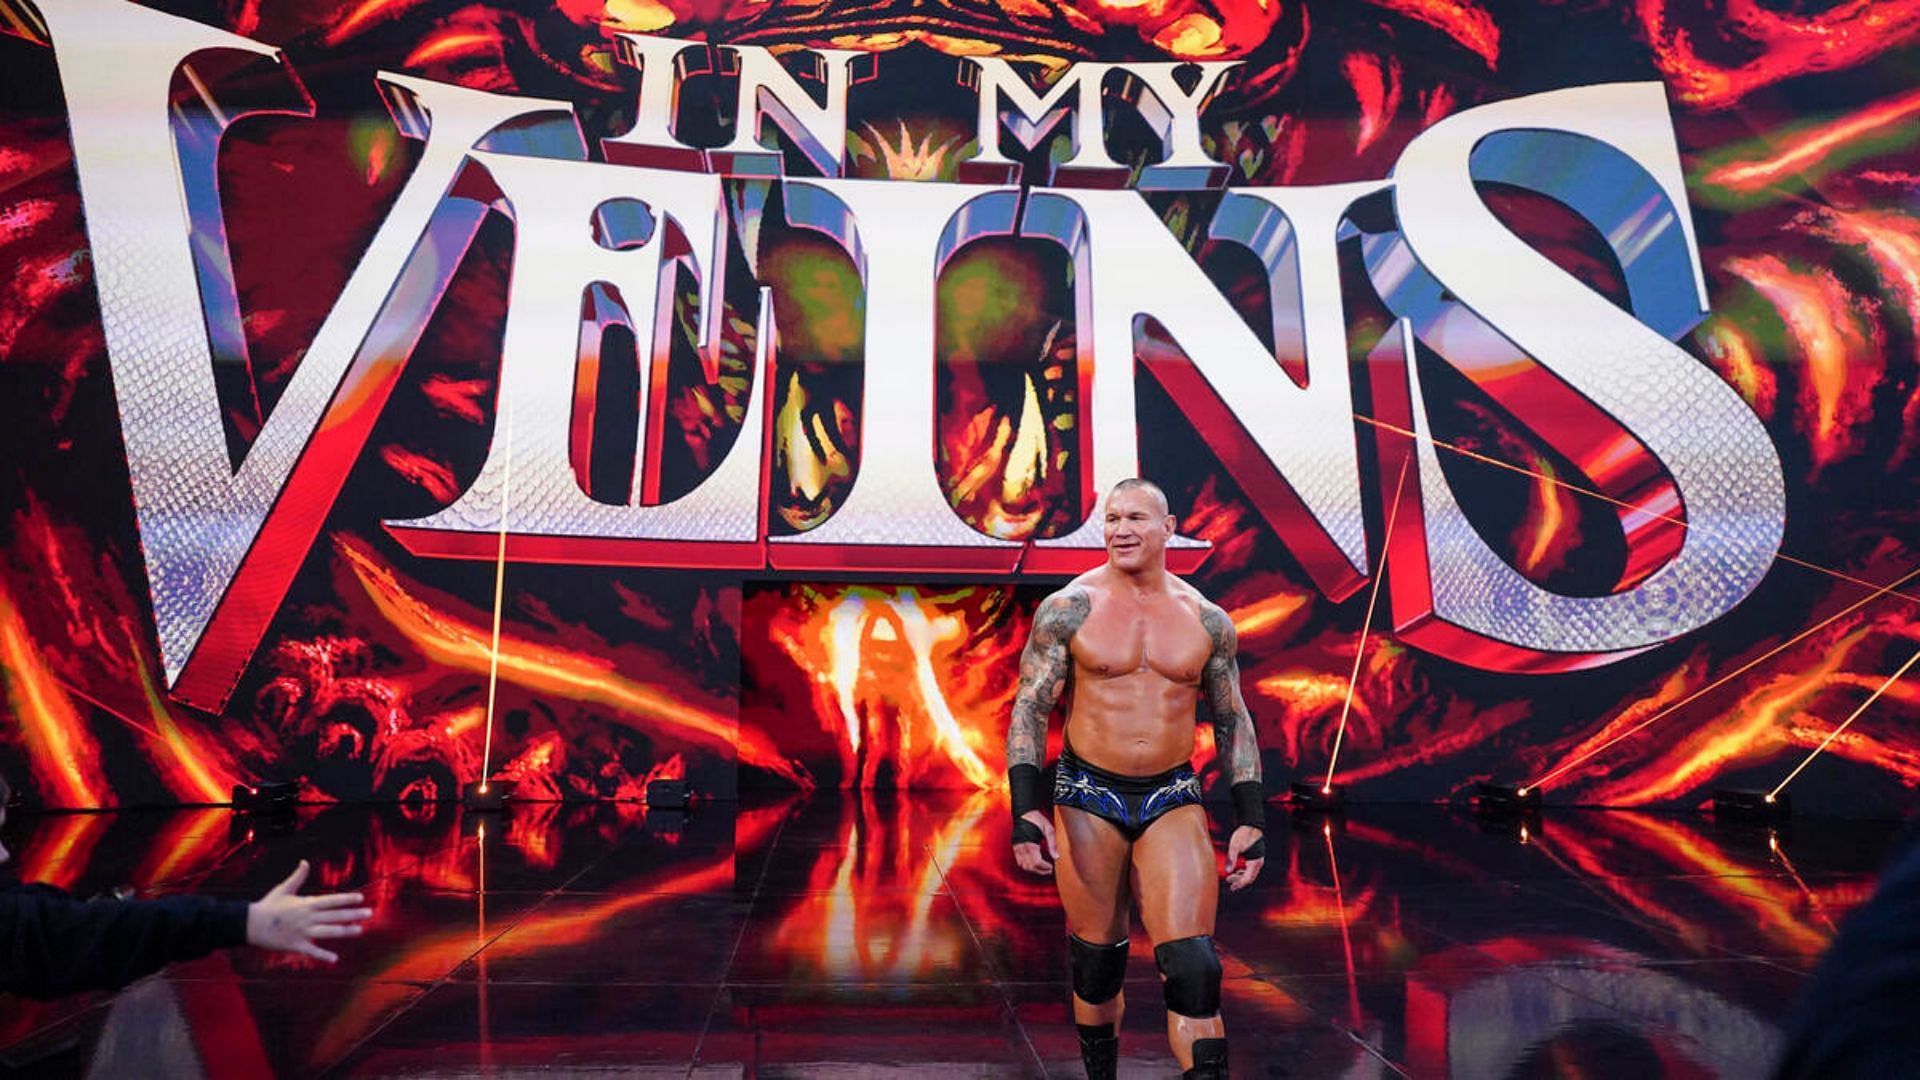 Randy Orton is a 14-time world champion [Photo courtesy of WWE